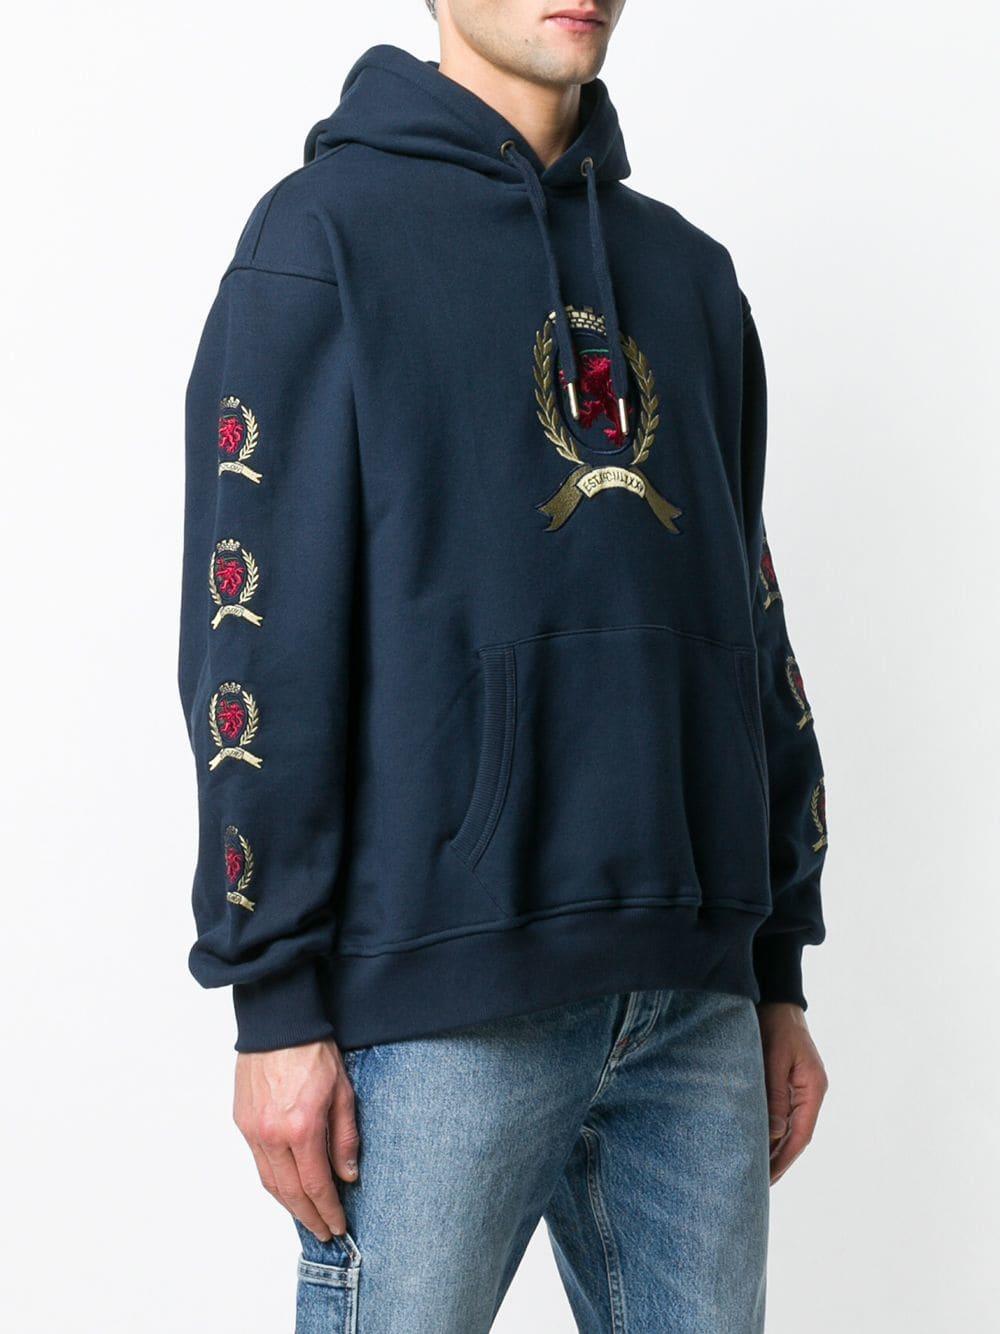 Tommy Jeans Crest 6.0 Hoody Outlet, SAVE 59%.